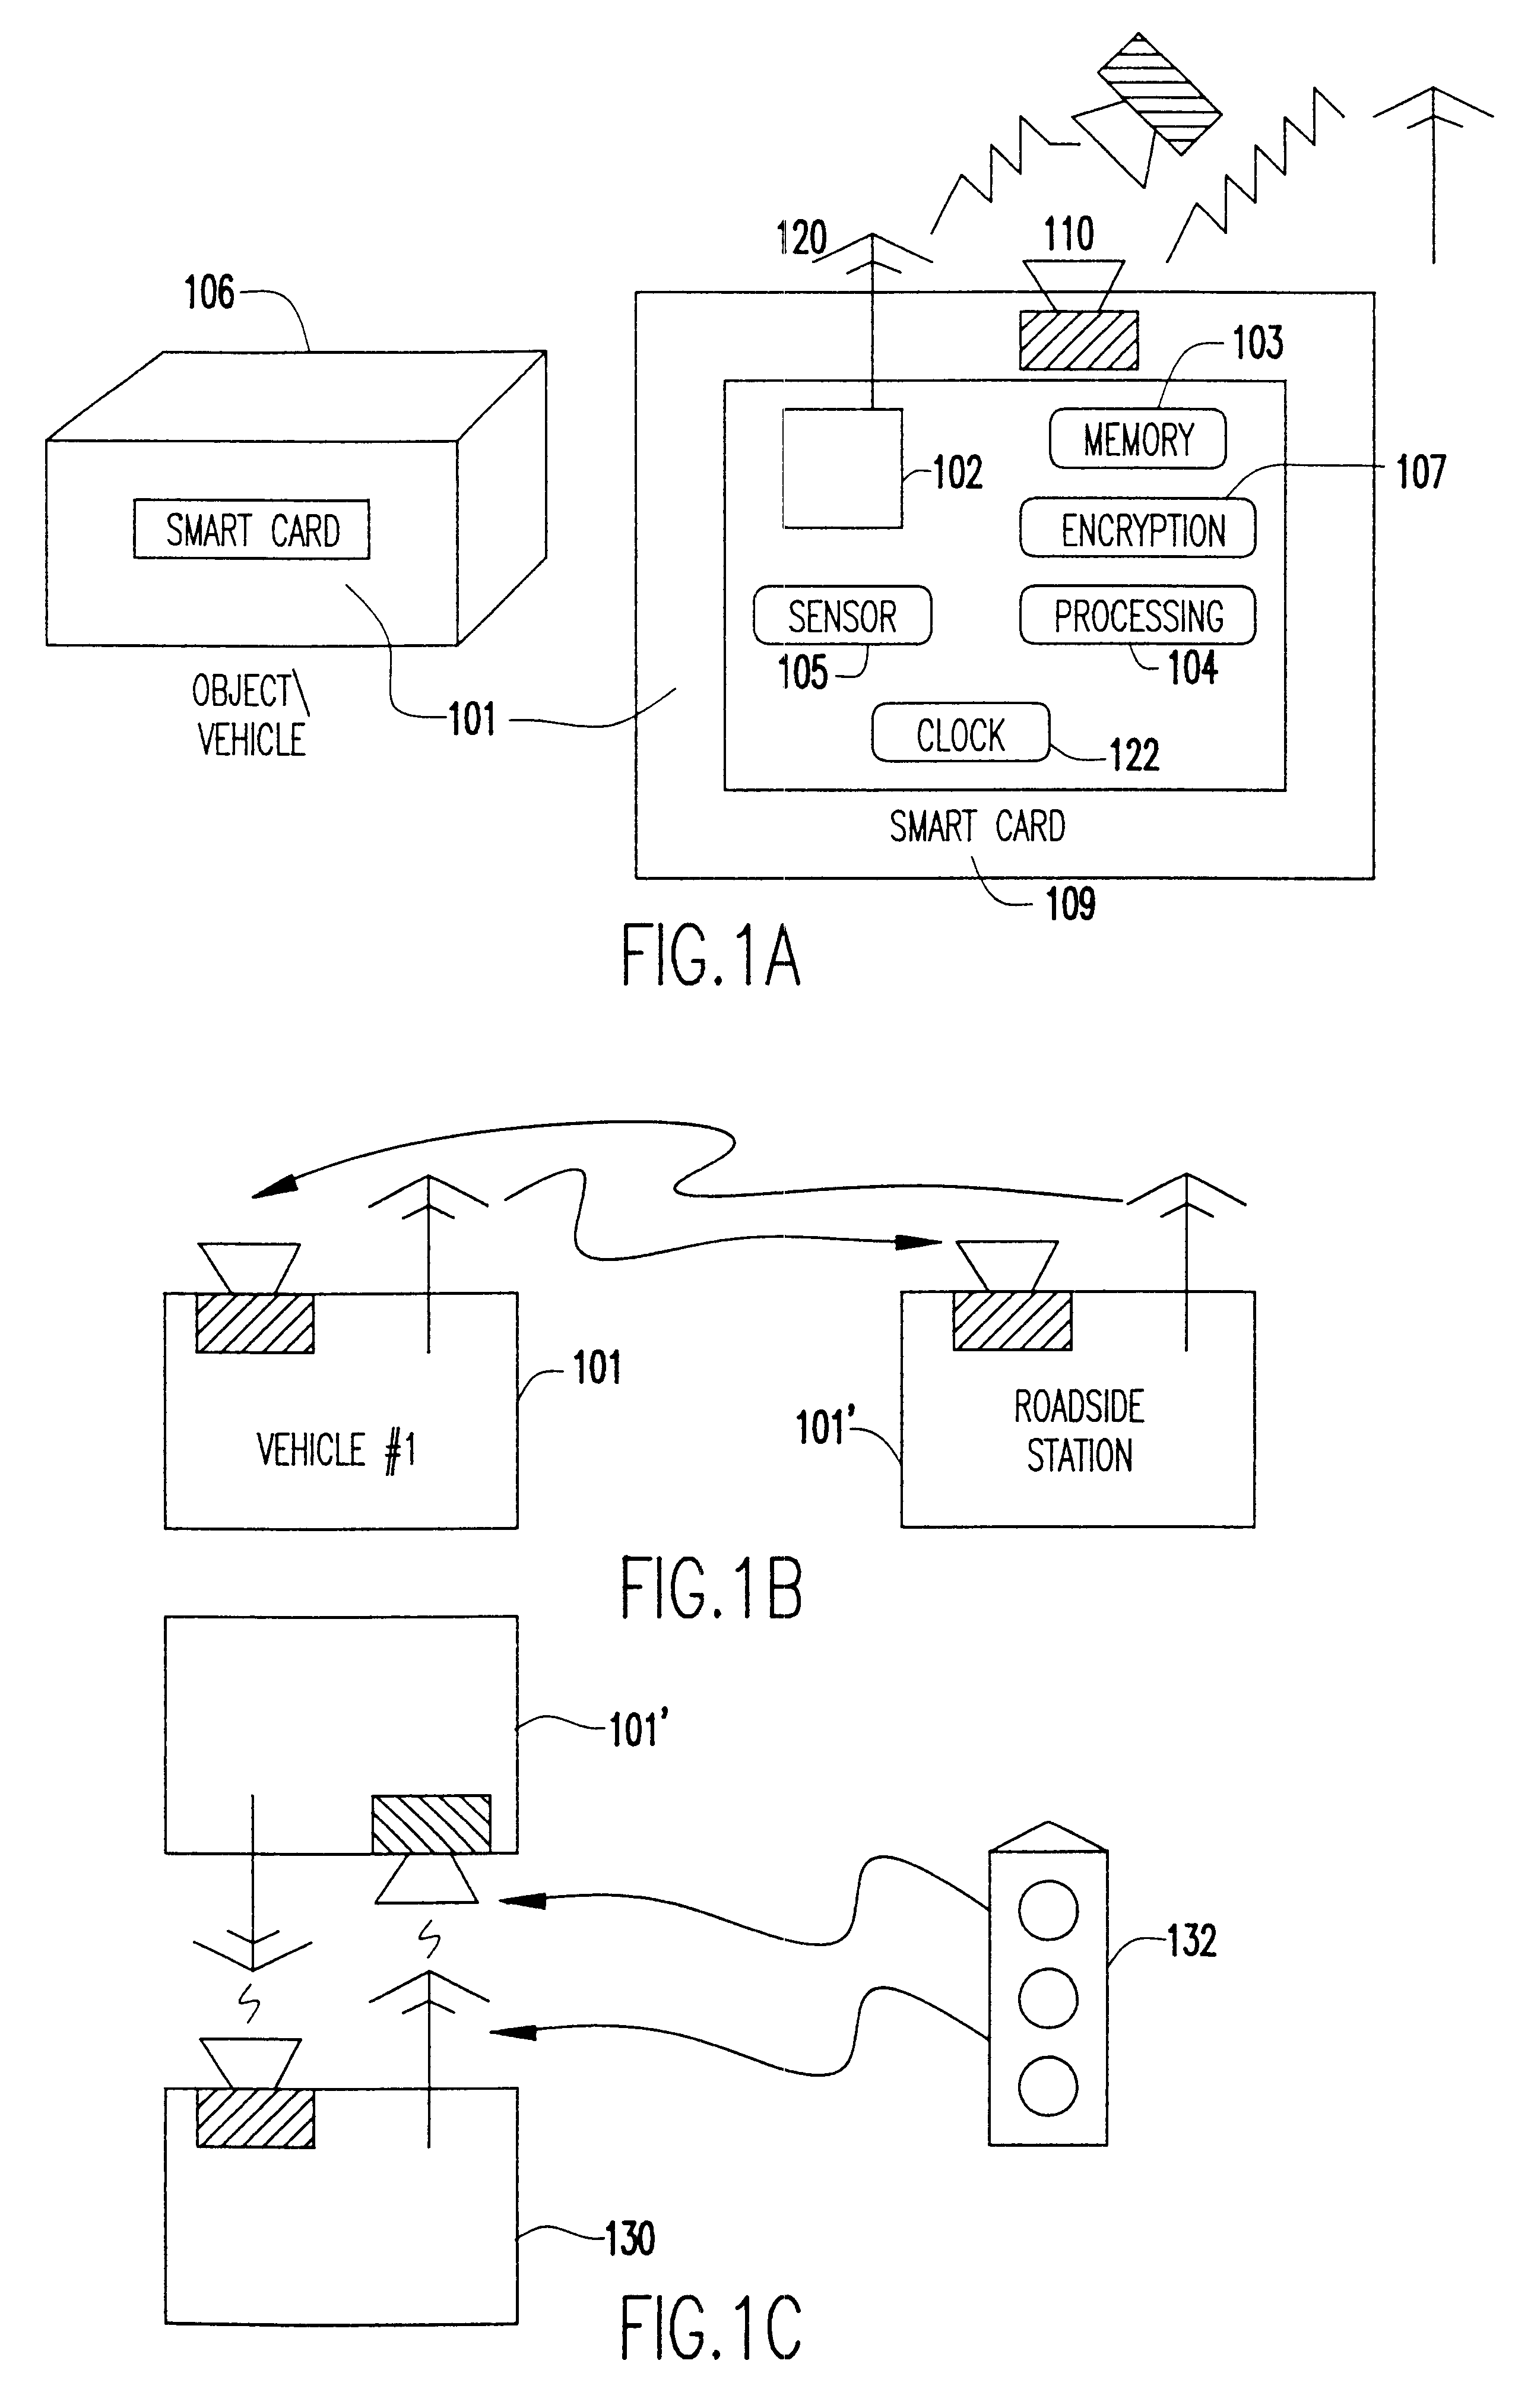 Event-recorder for transmitting and storing electronic signature data